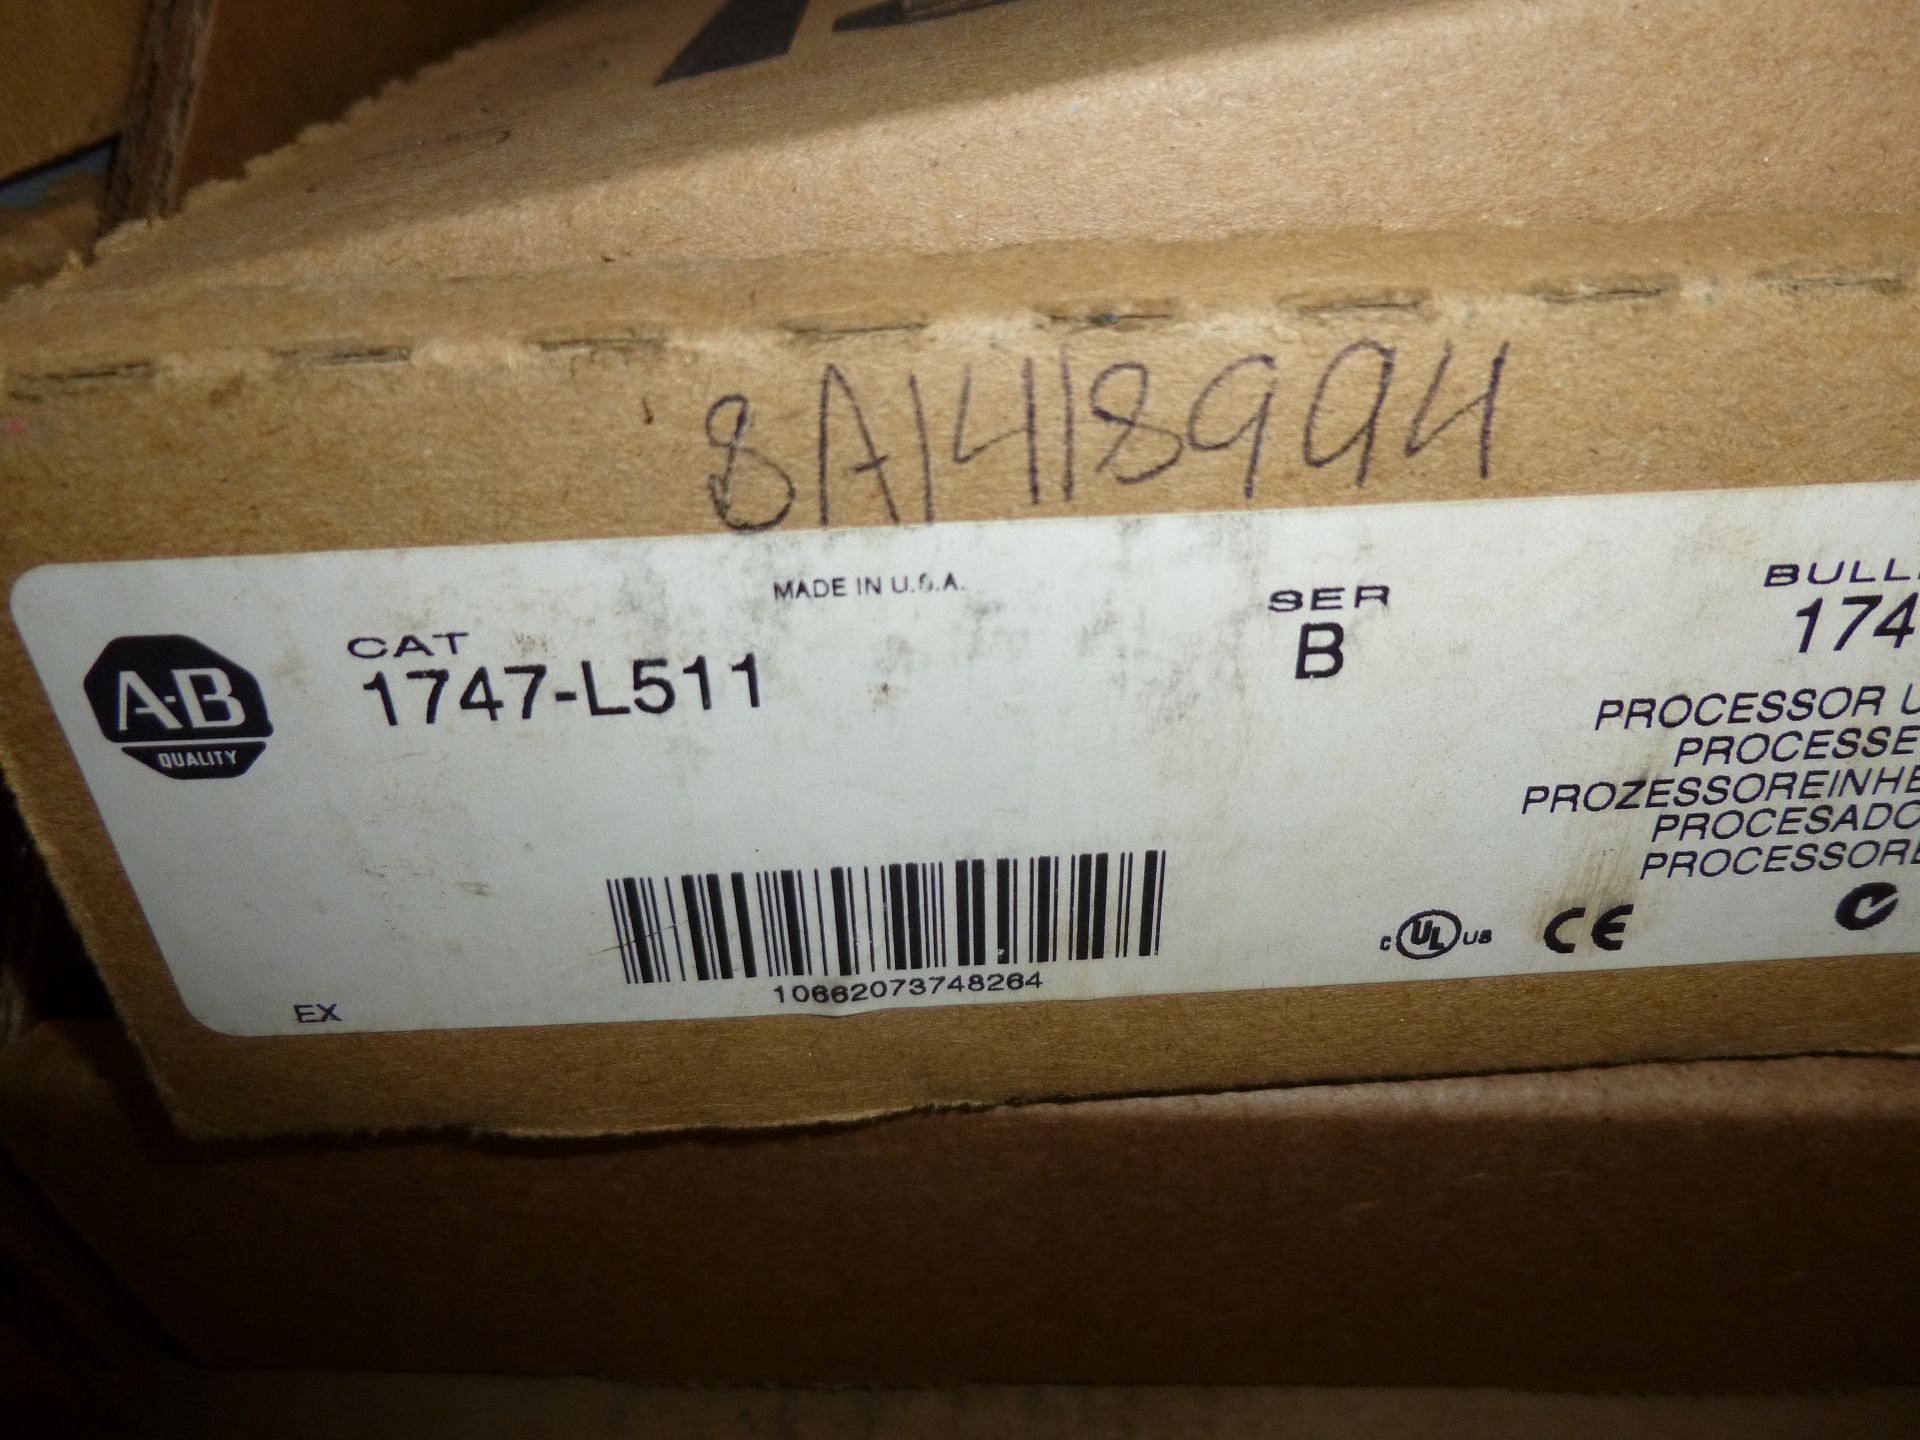 Allen Bradley model 1747-L511 ser B, new in box as pictured, as always with Brolyn LLC auctions, all - Image 2 of 3